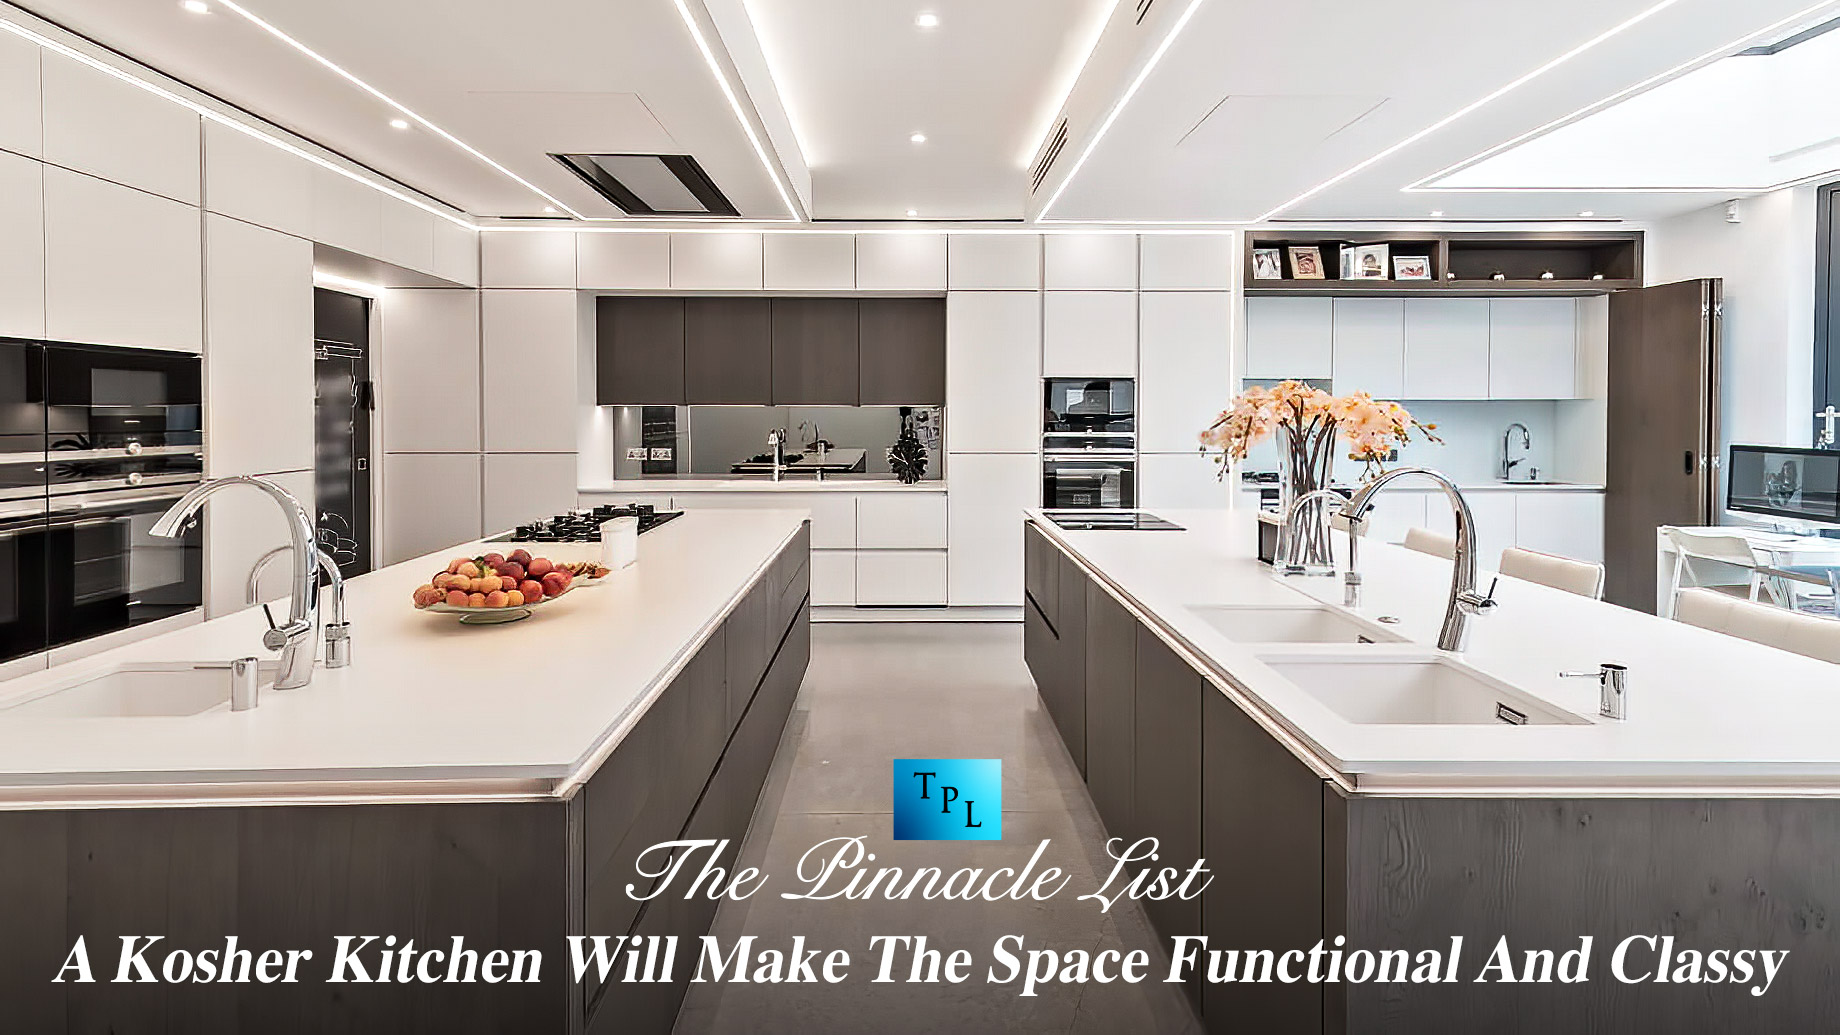 A Kosher Kitchen Will Make The Space Functional And Classy